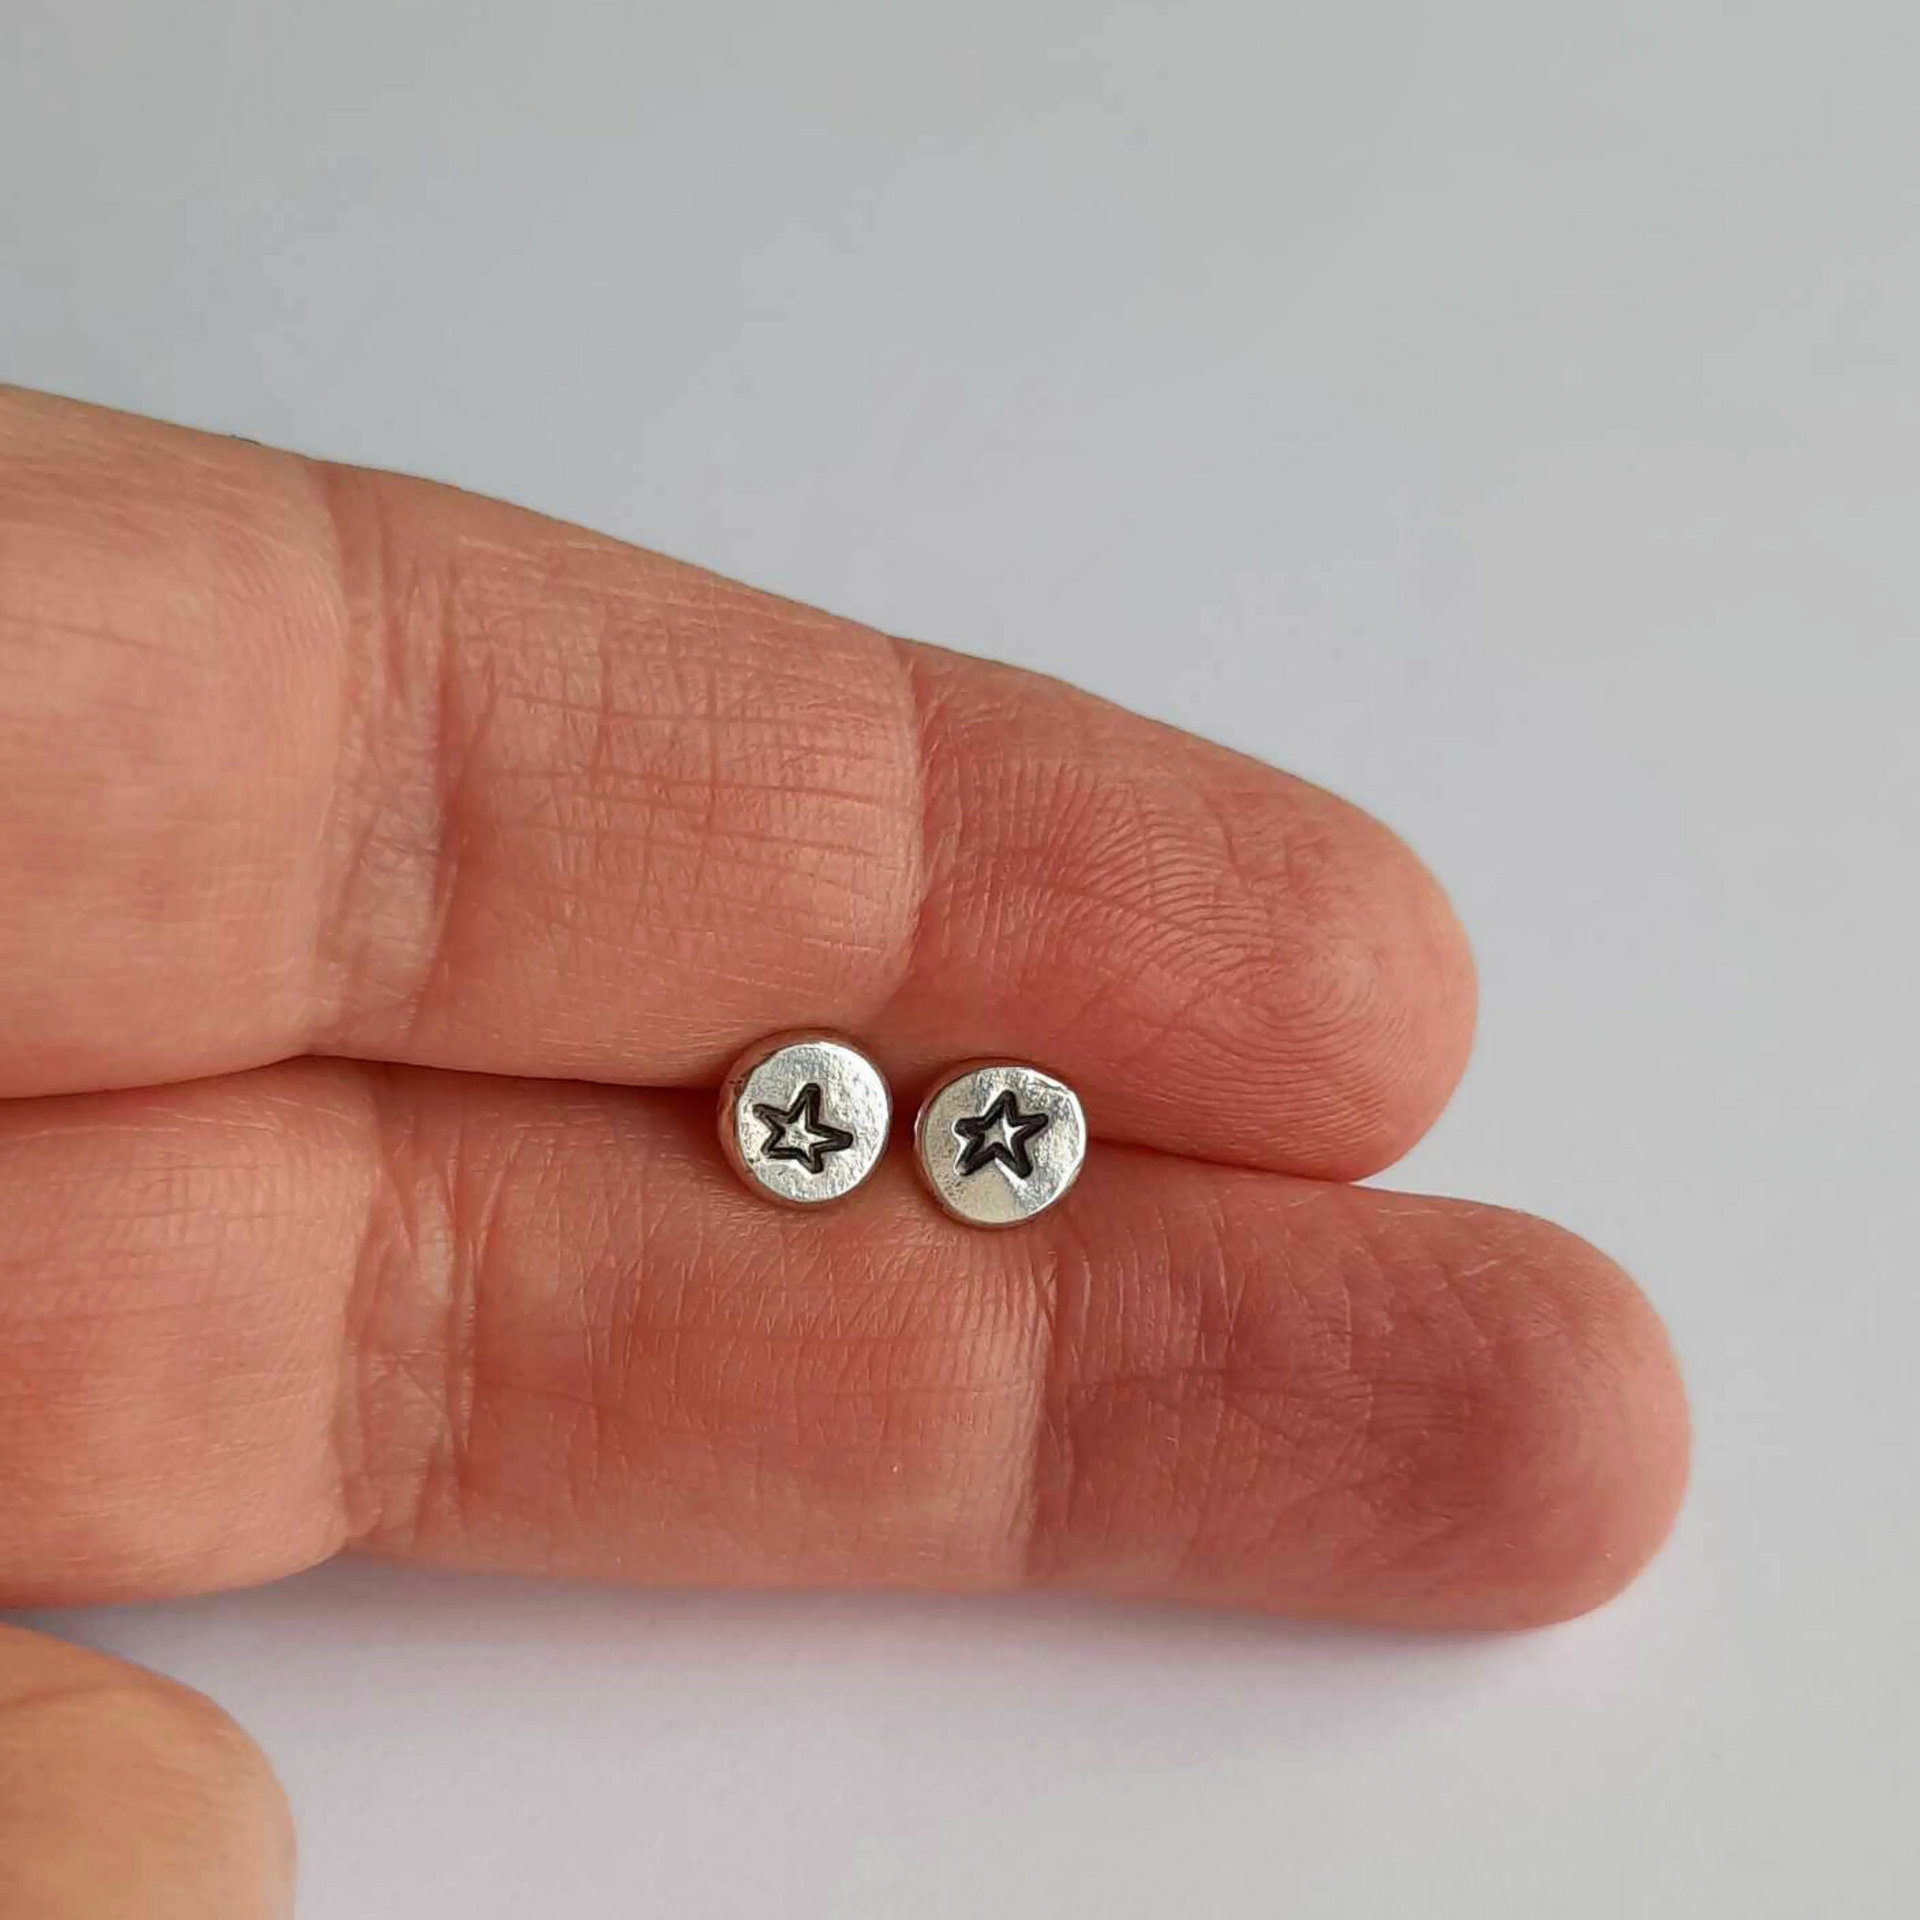 Dainty sterling silver celestial star studs, artisan made by The Tiny Tree Frog Jewellery